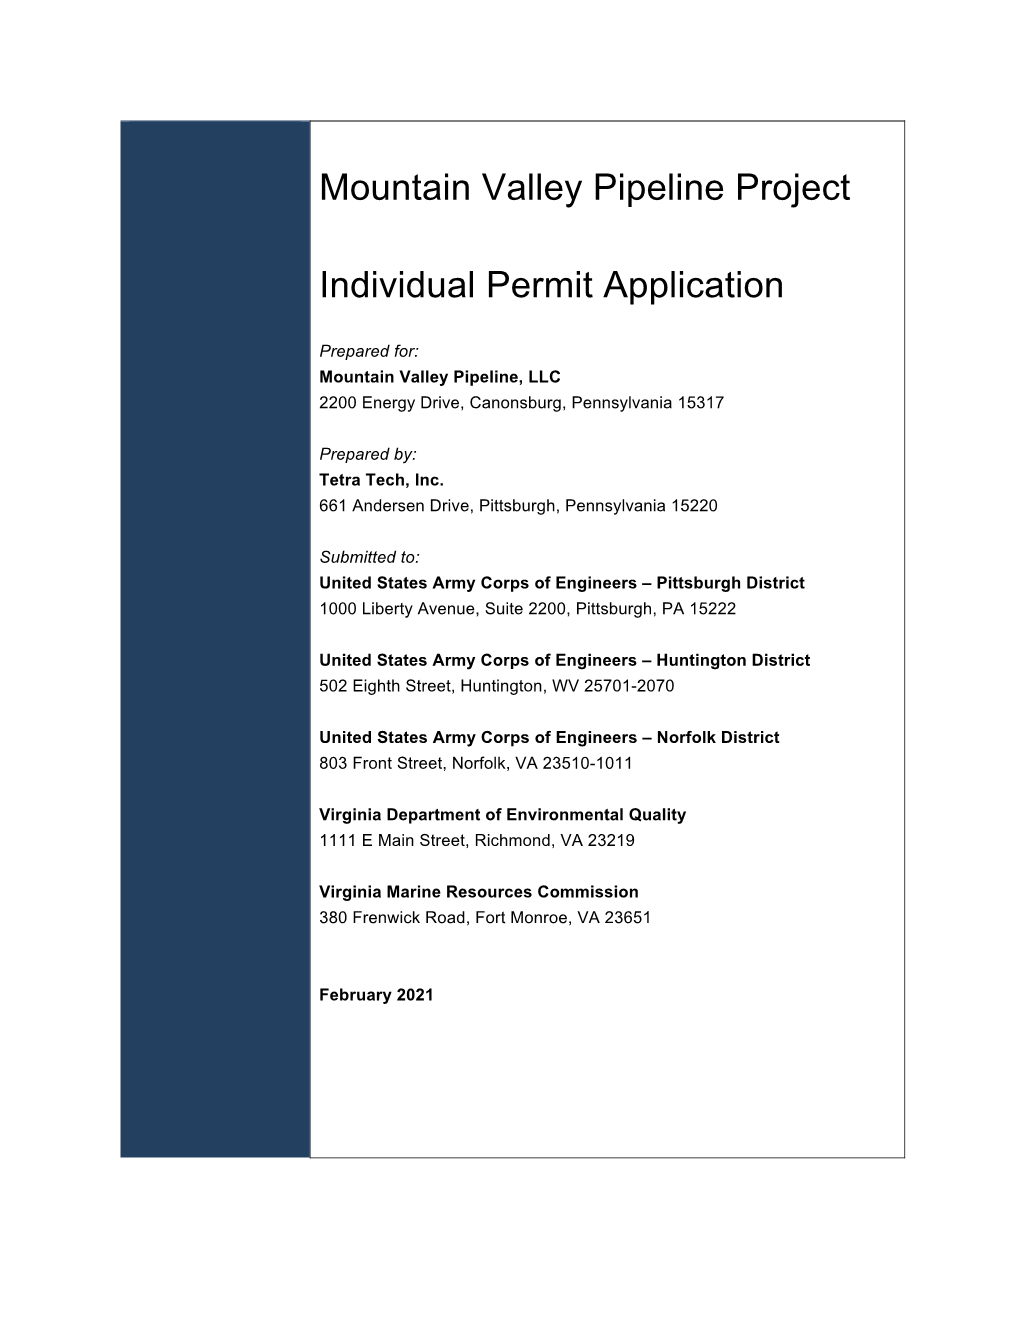 Mountain Valley Pipeline Project Individual Permit Application